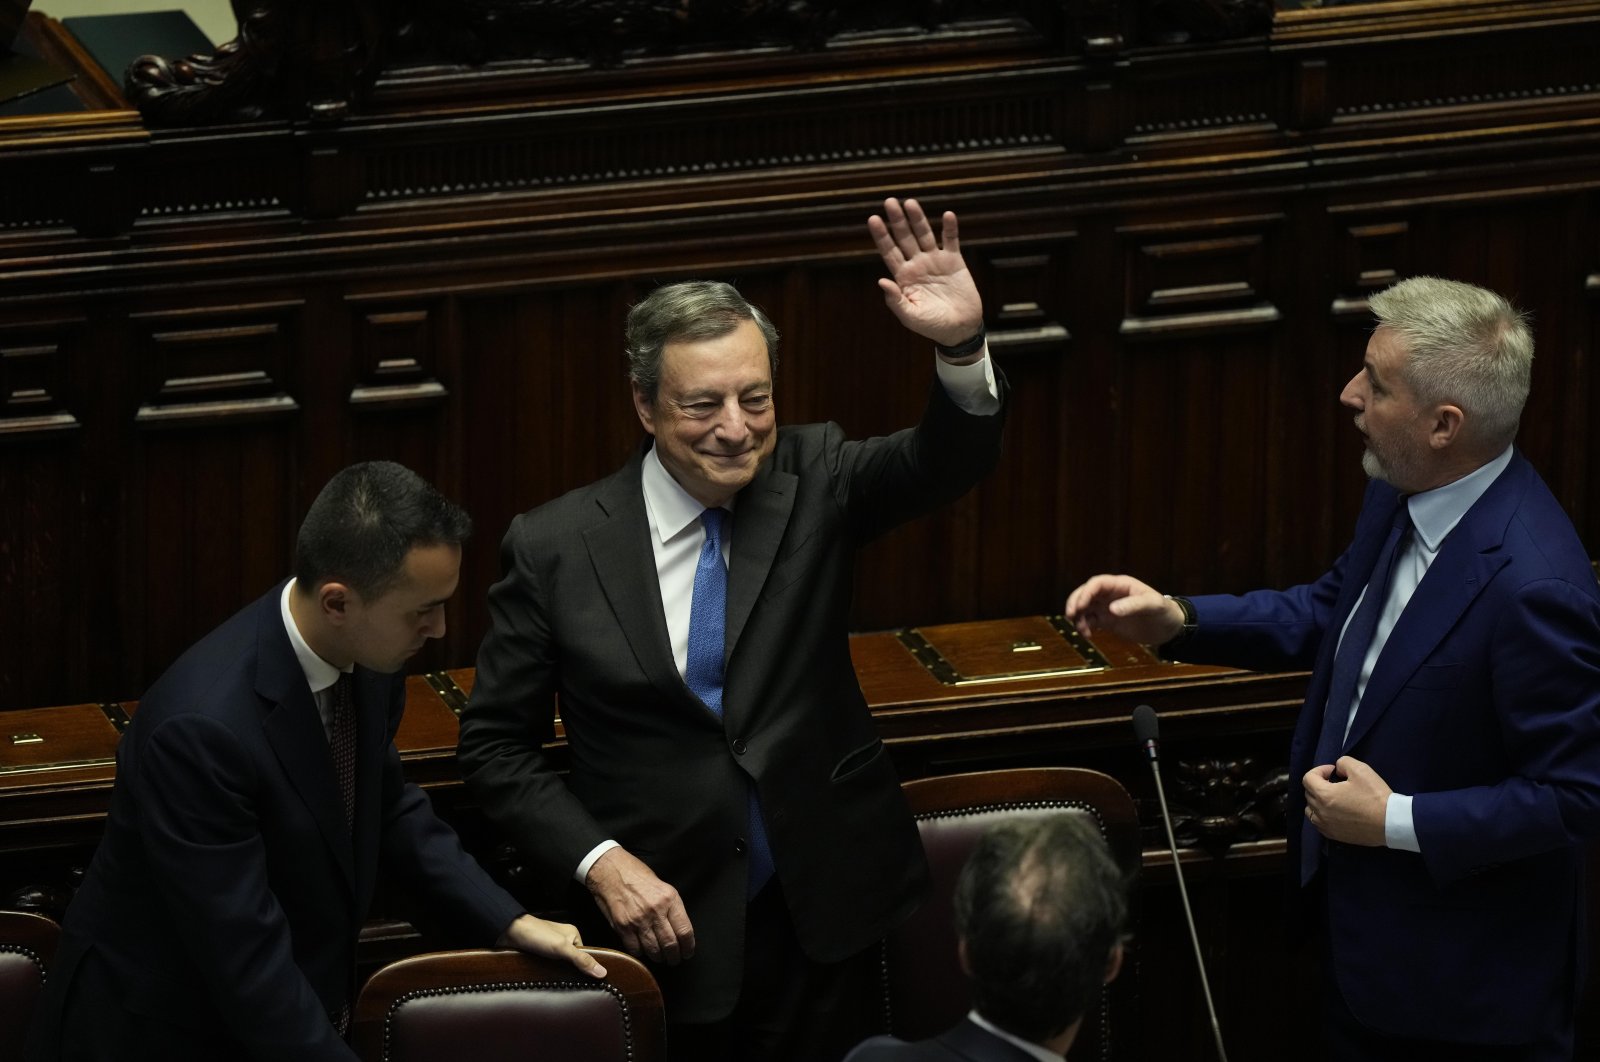 Italian Premier Mario Draghi waves to lawmakers at the end of his address at the Parliament in Rome, Italy, July 21, 2022. (AP Photo)